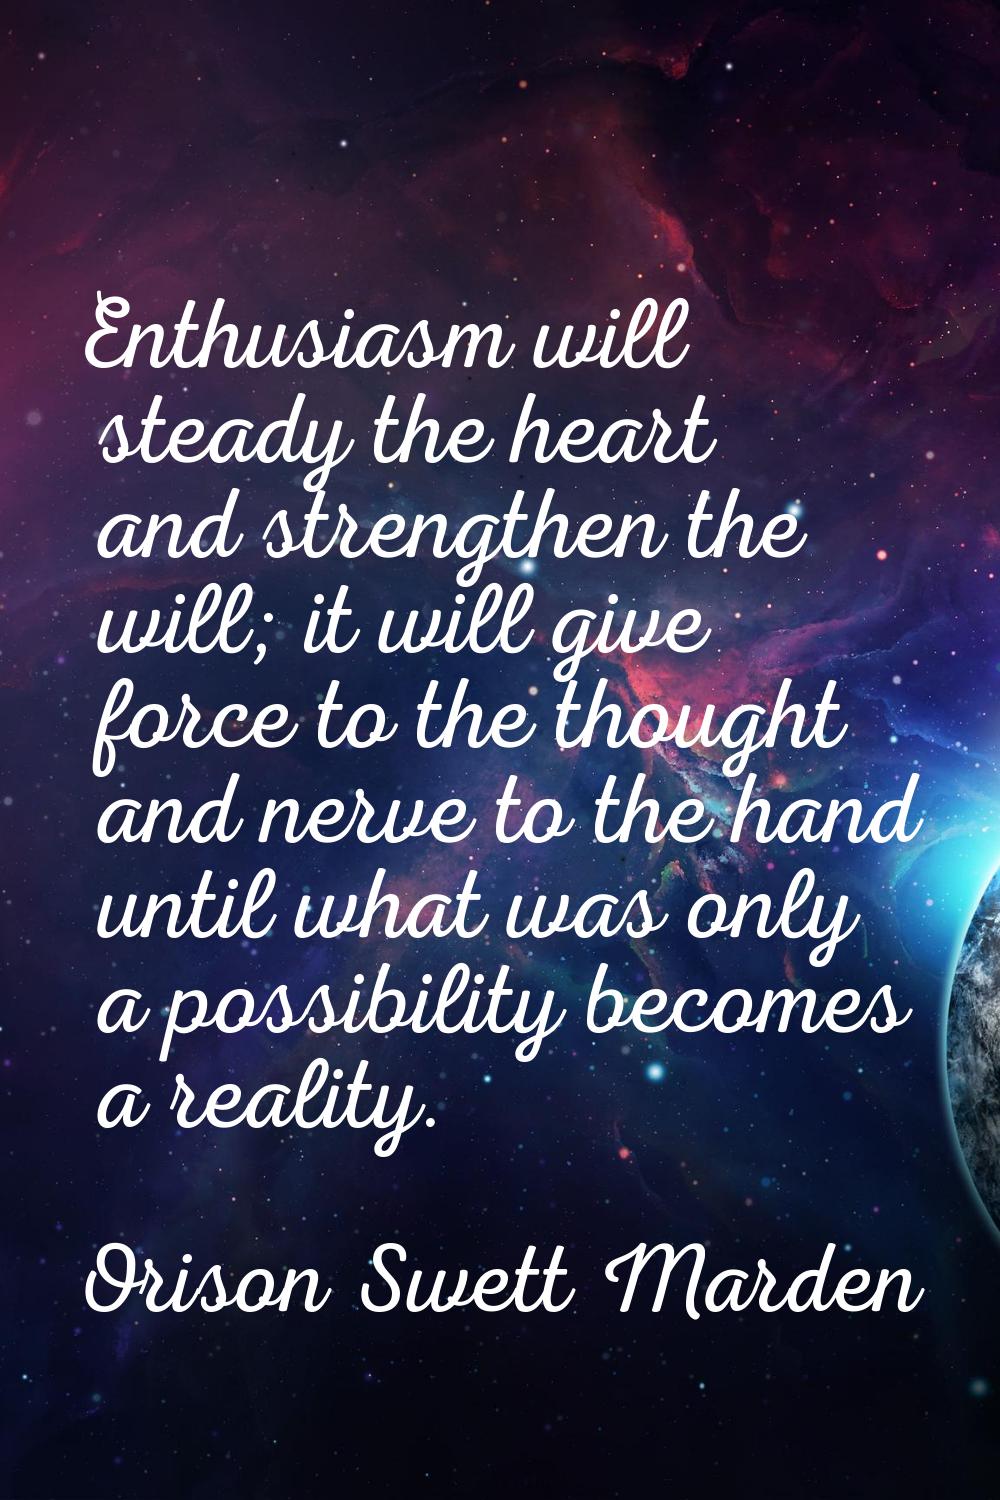 Enthusiasm will steady the heart and strengthen the will; it will give force to the thought and ner